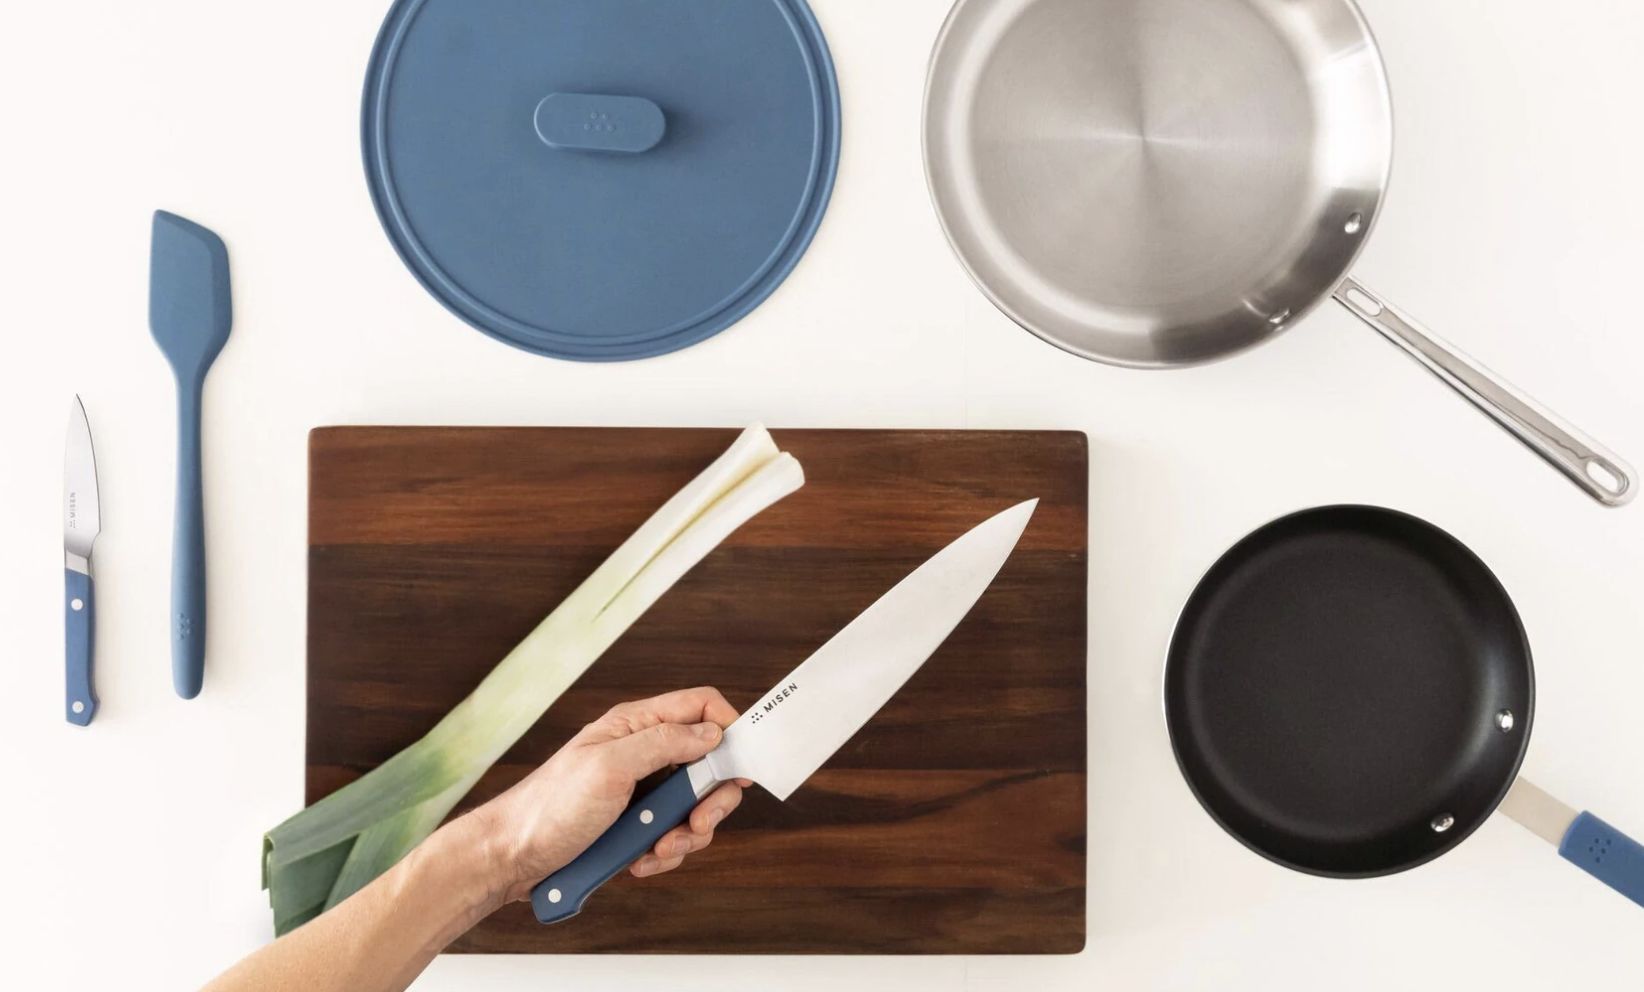 Misen sale: Take 20% off bestselling premium cookware for Mother's